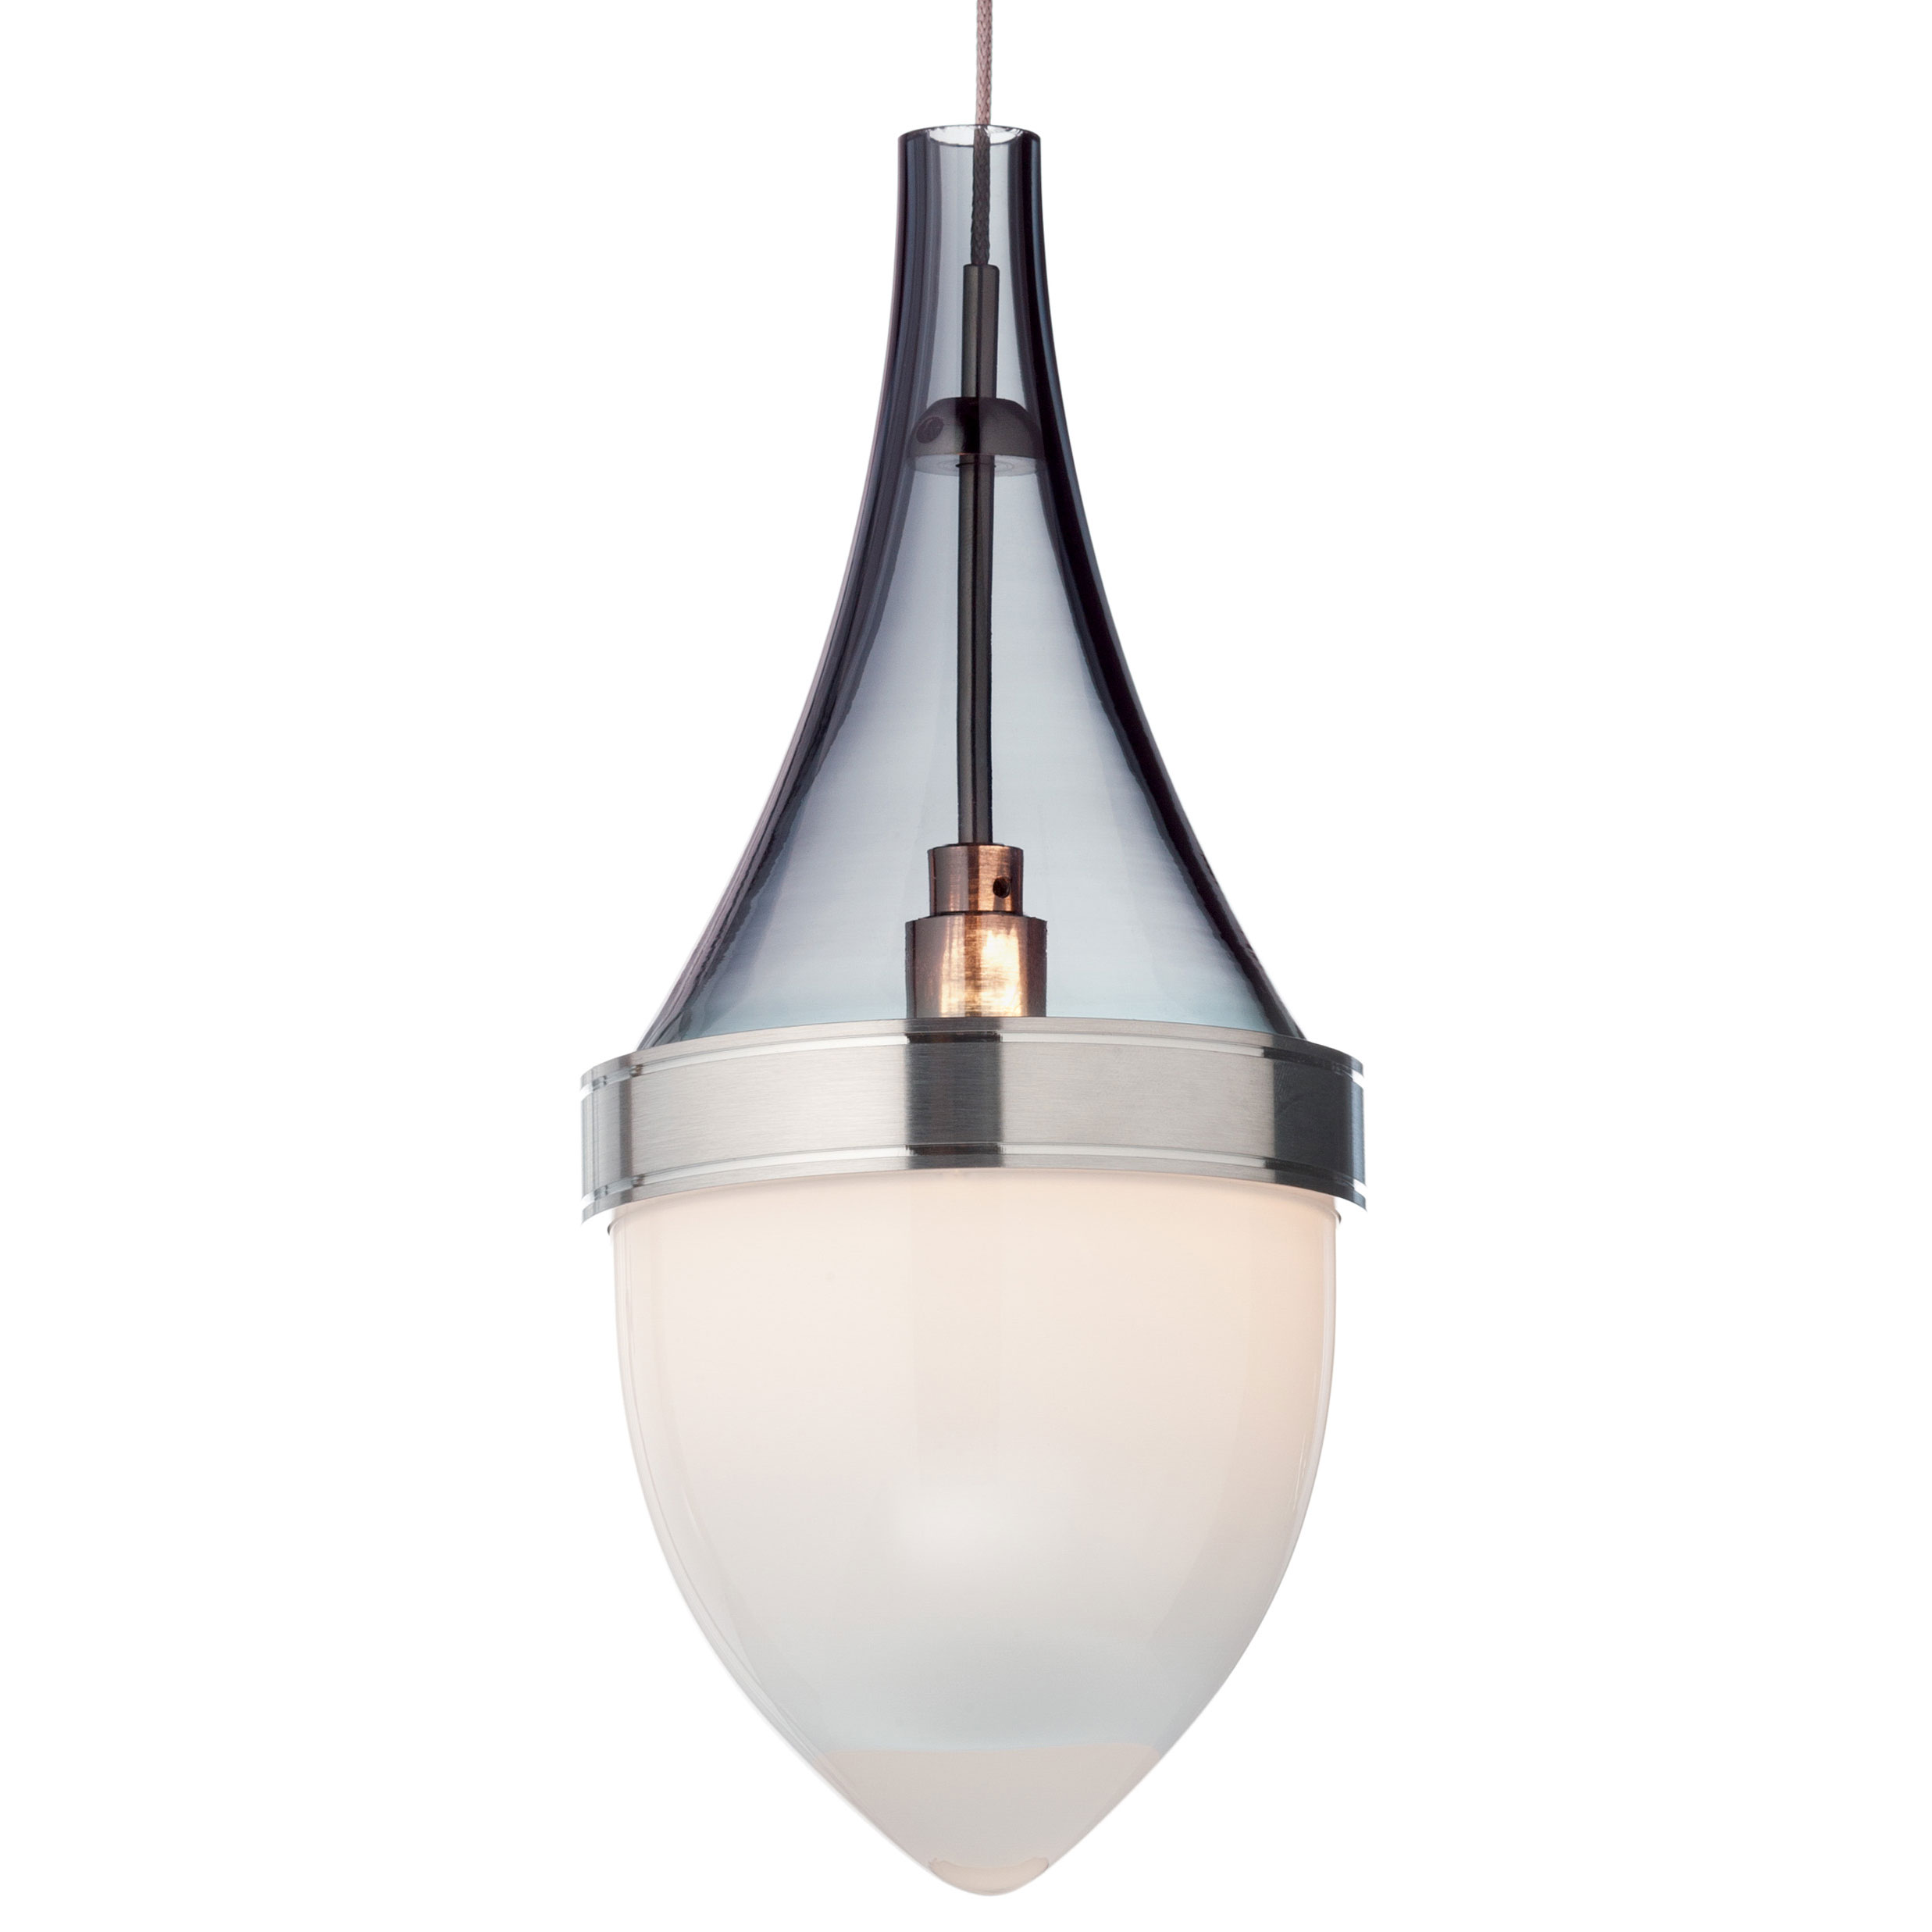 Metal+Glass with 1*E27 Hanging Light Cheap Pendant Lamp